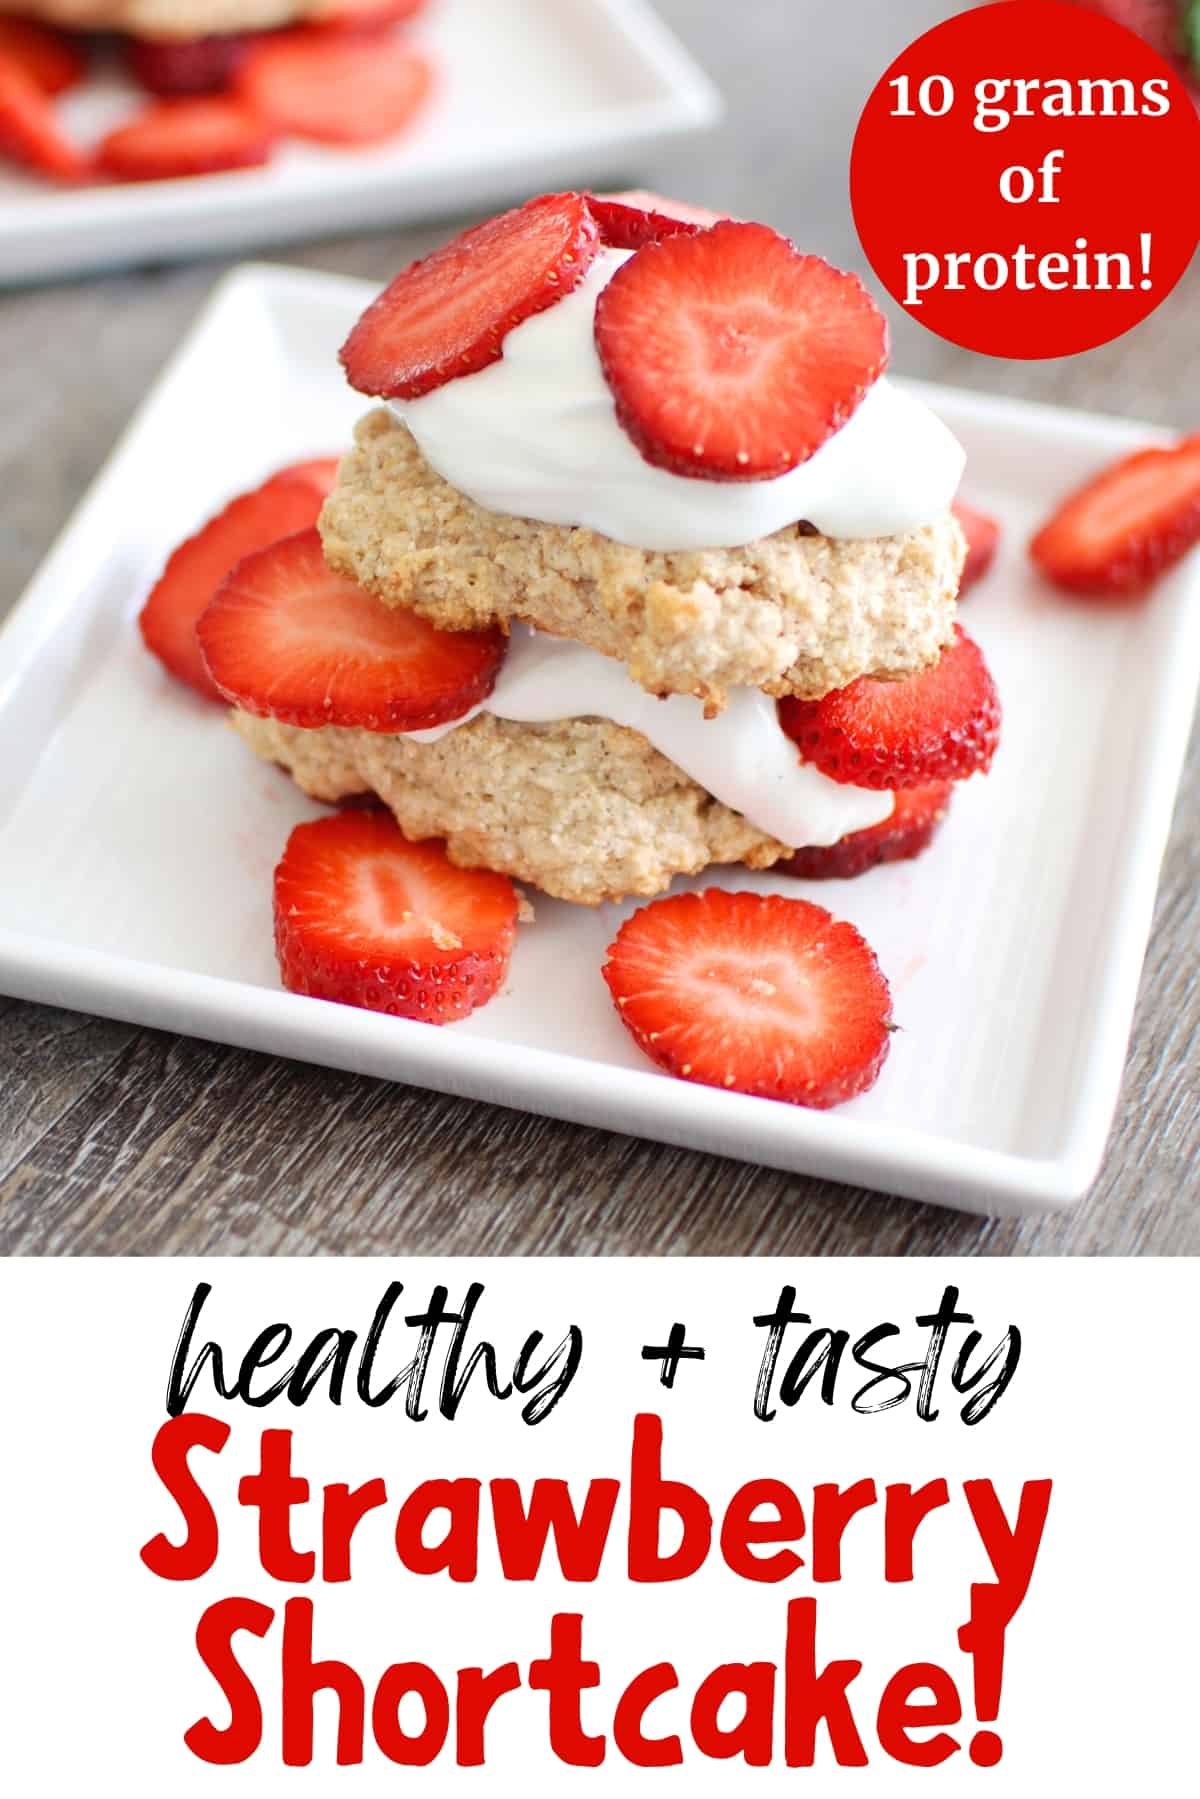 A healthy strawberry shortcake with layered strawberries and yogurt, with a text overlay with the name of the recipe.